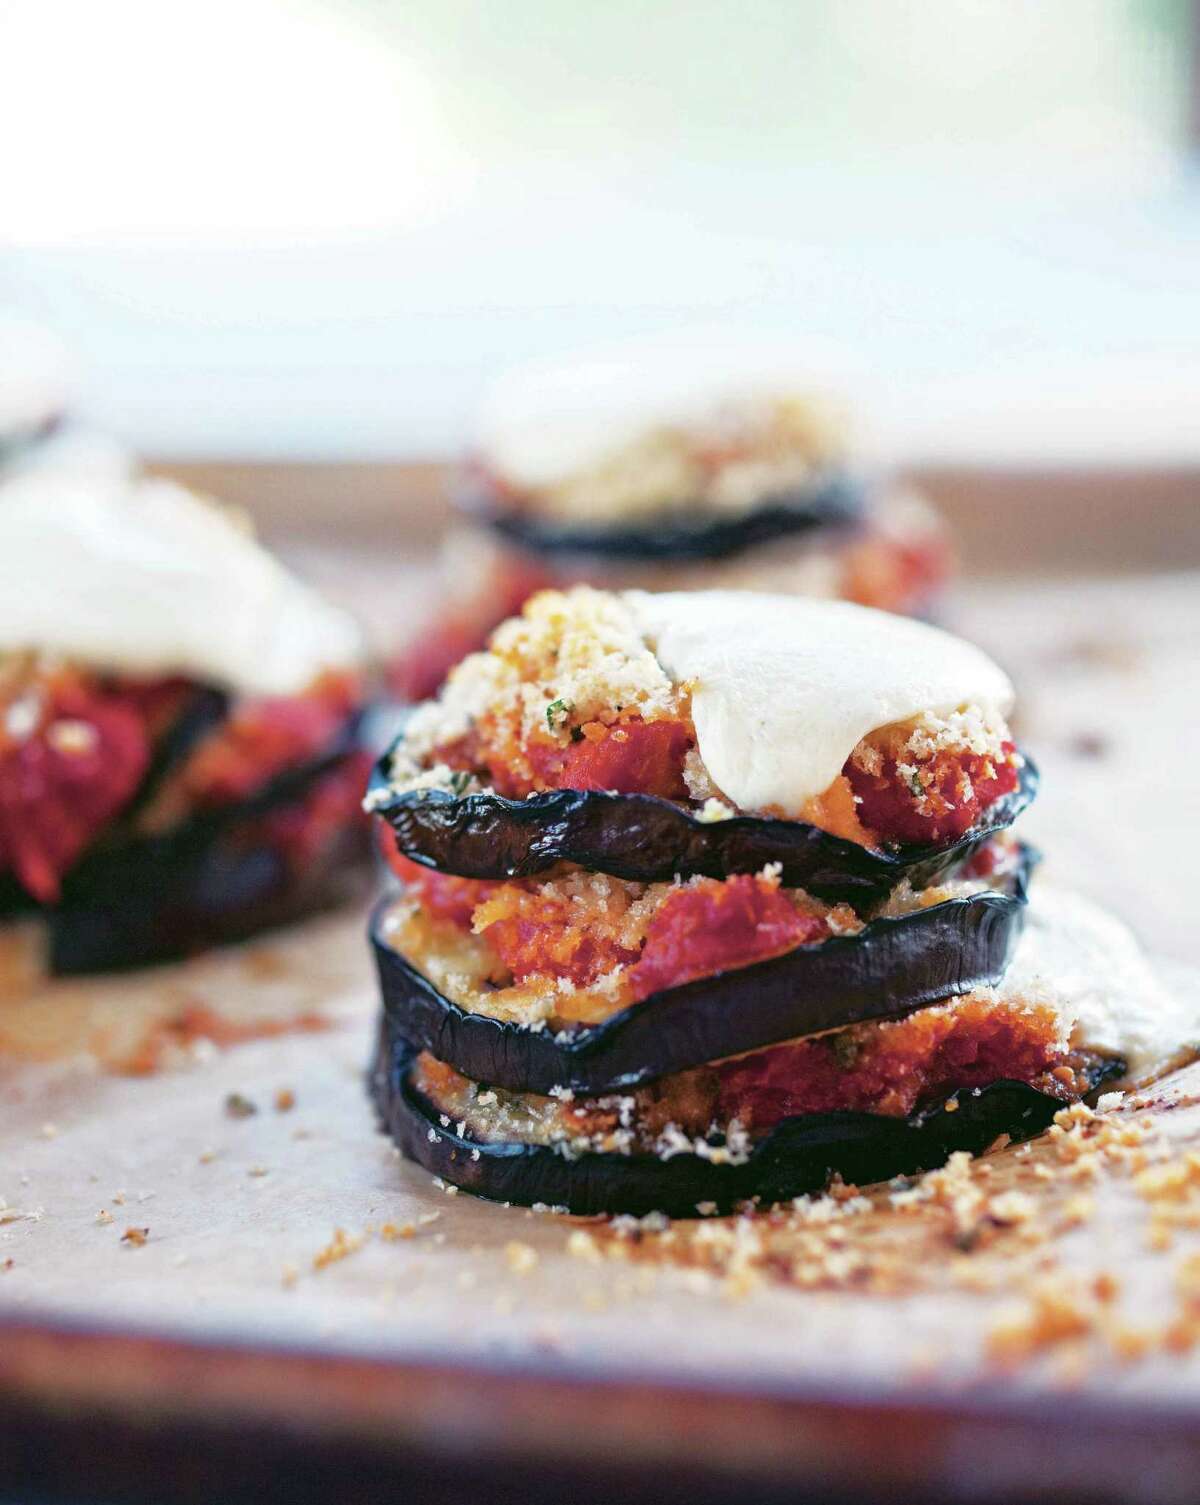 Eggplant Parm Stacks from "Mad hungry Cravings" by Lucinda Scala Quinn (Artisan Books).